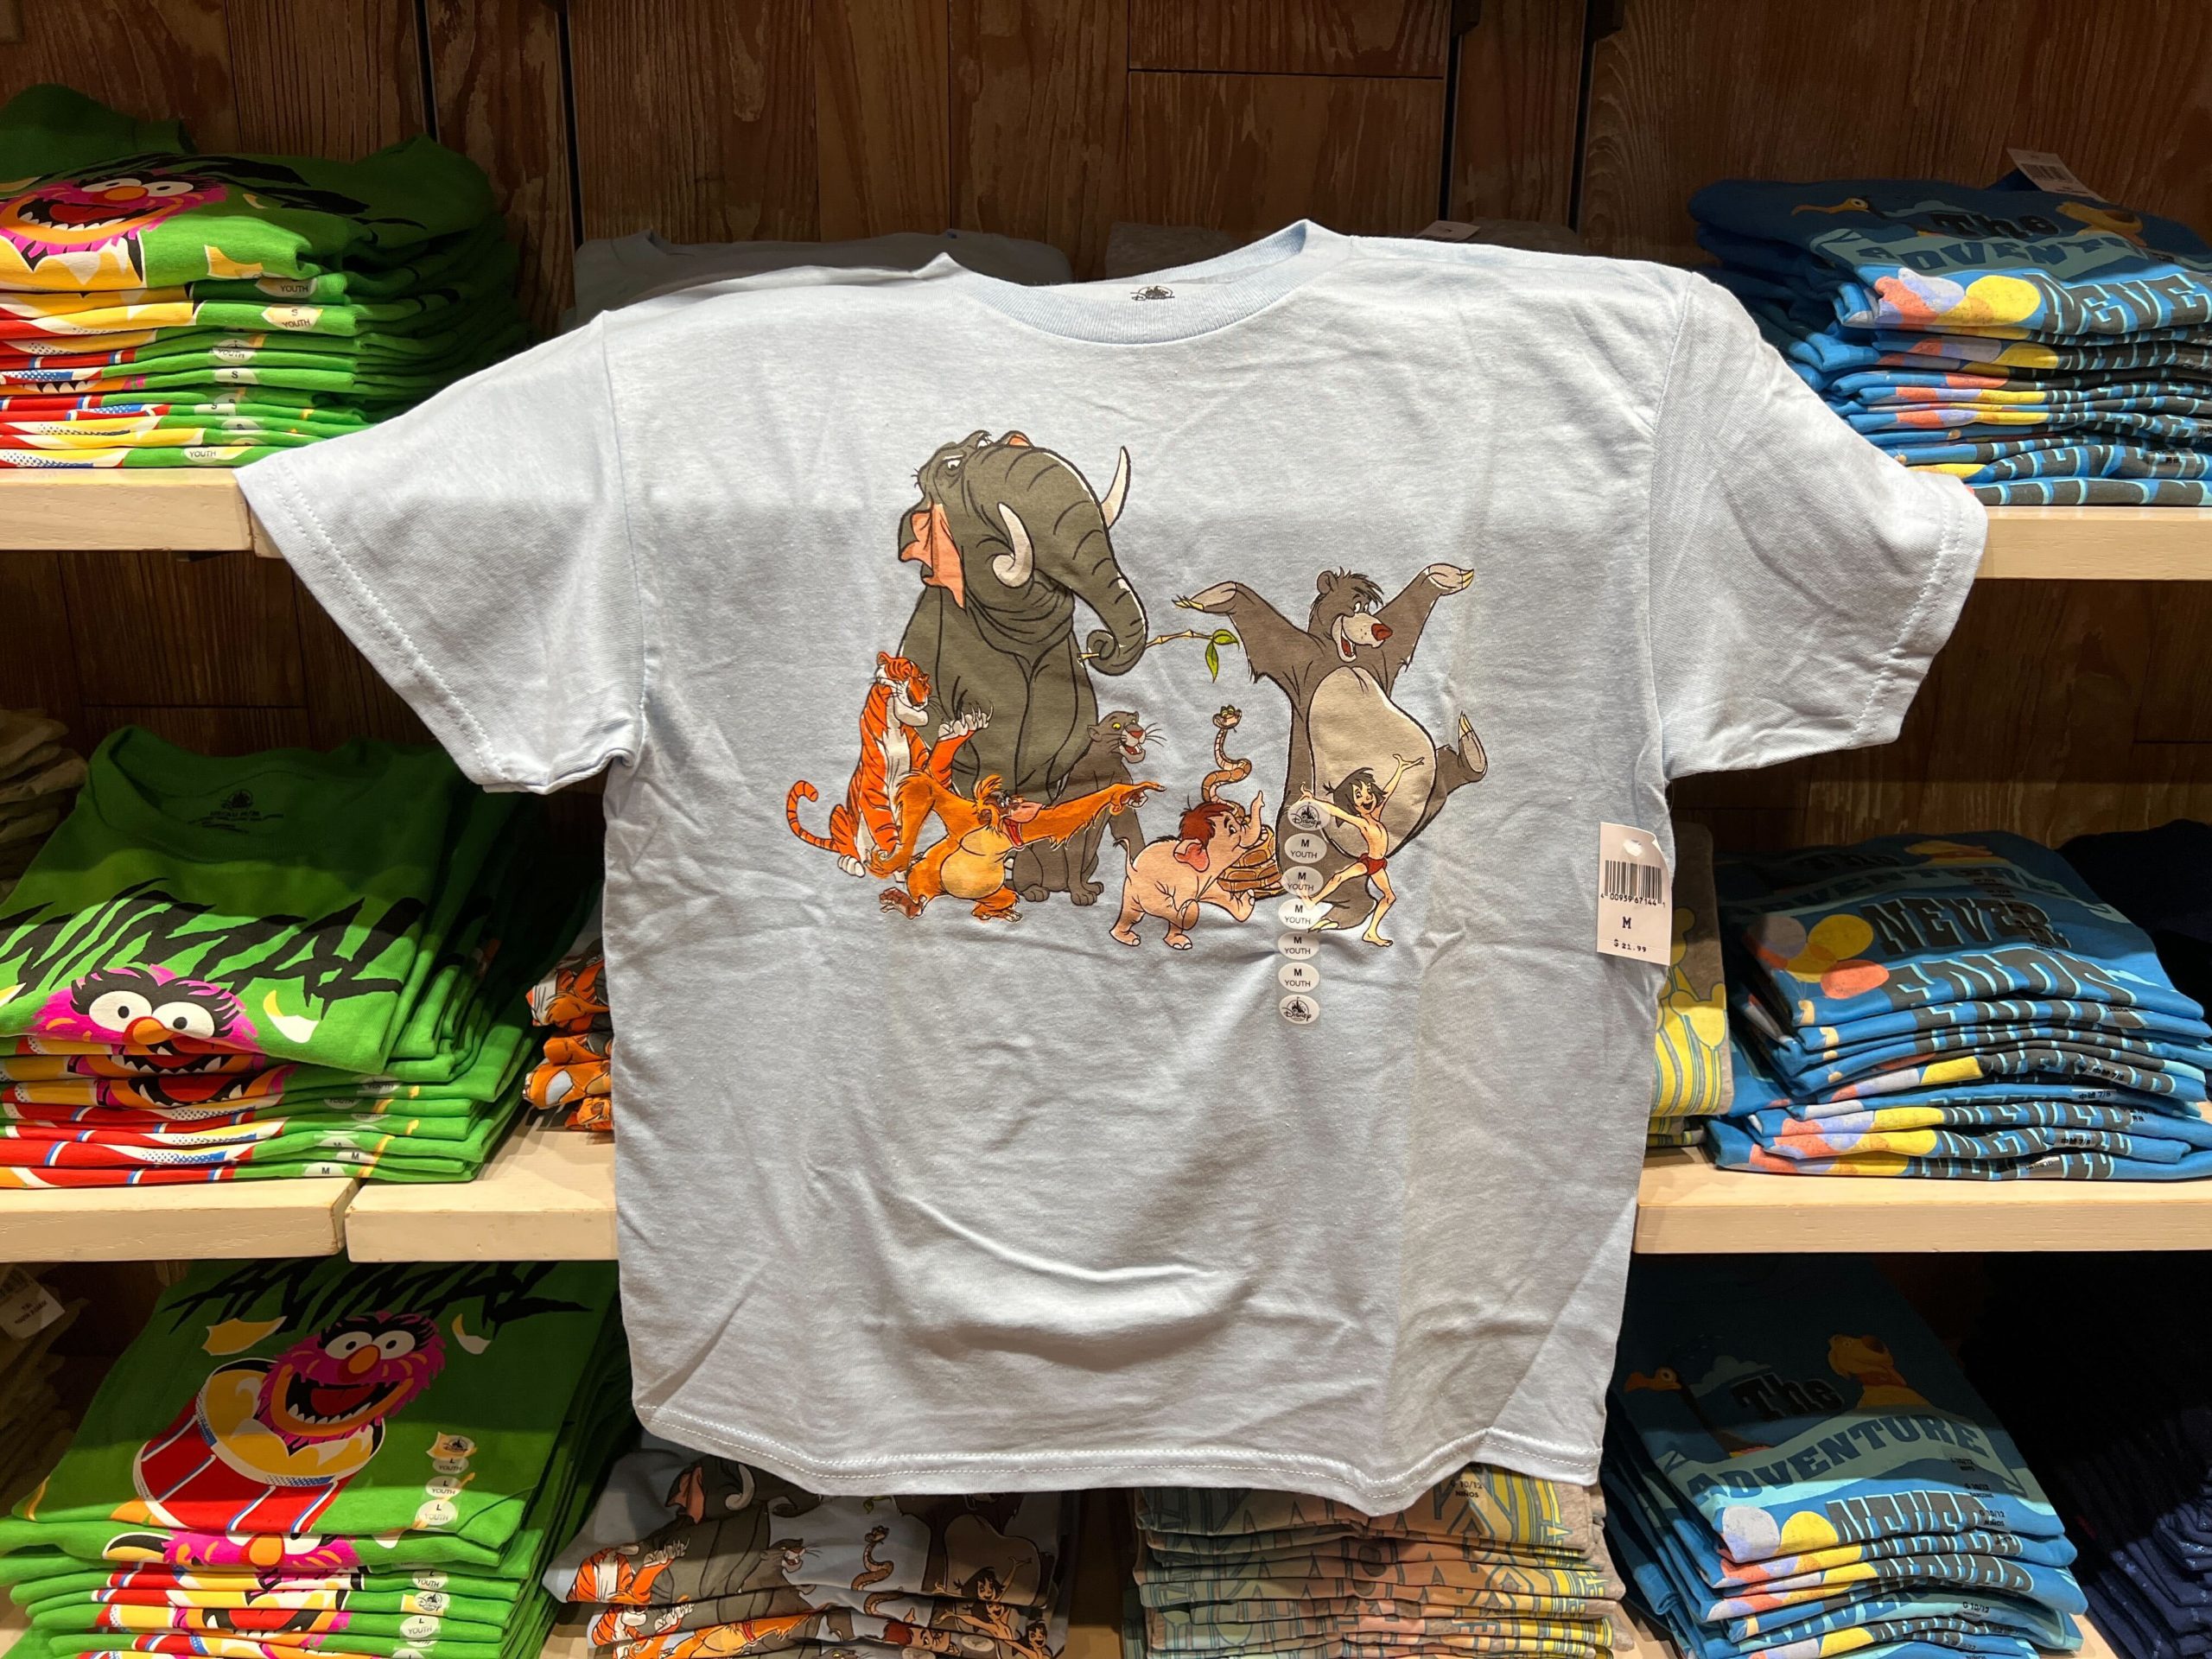 We Love These New Disney Youth Tees from World of Disney! - MickeyBlog.com